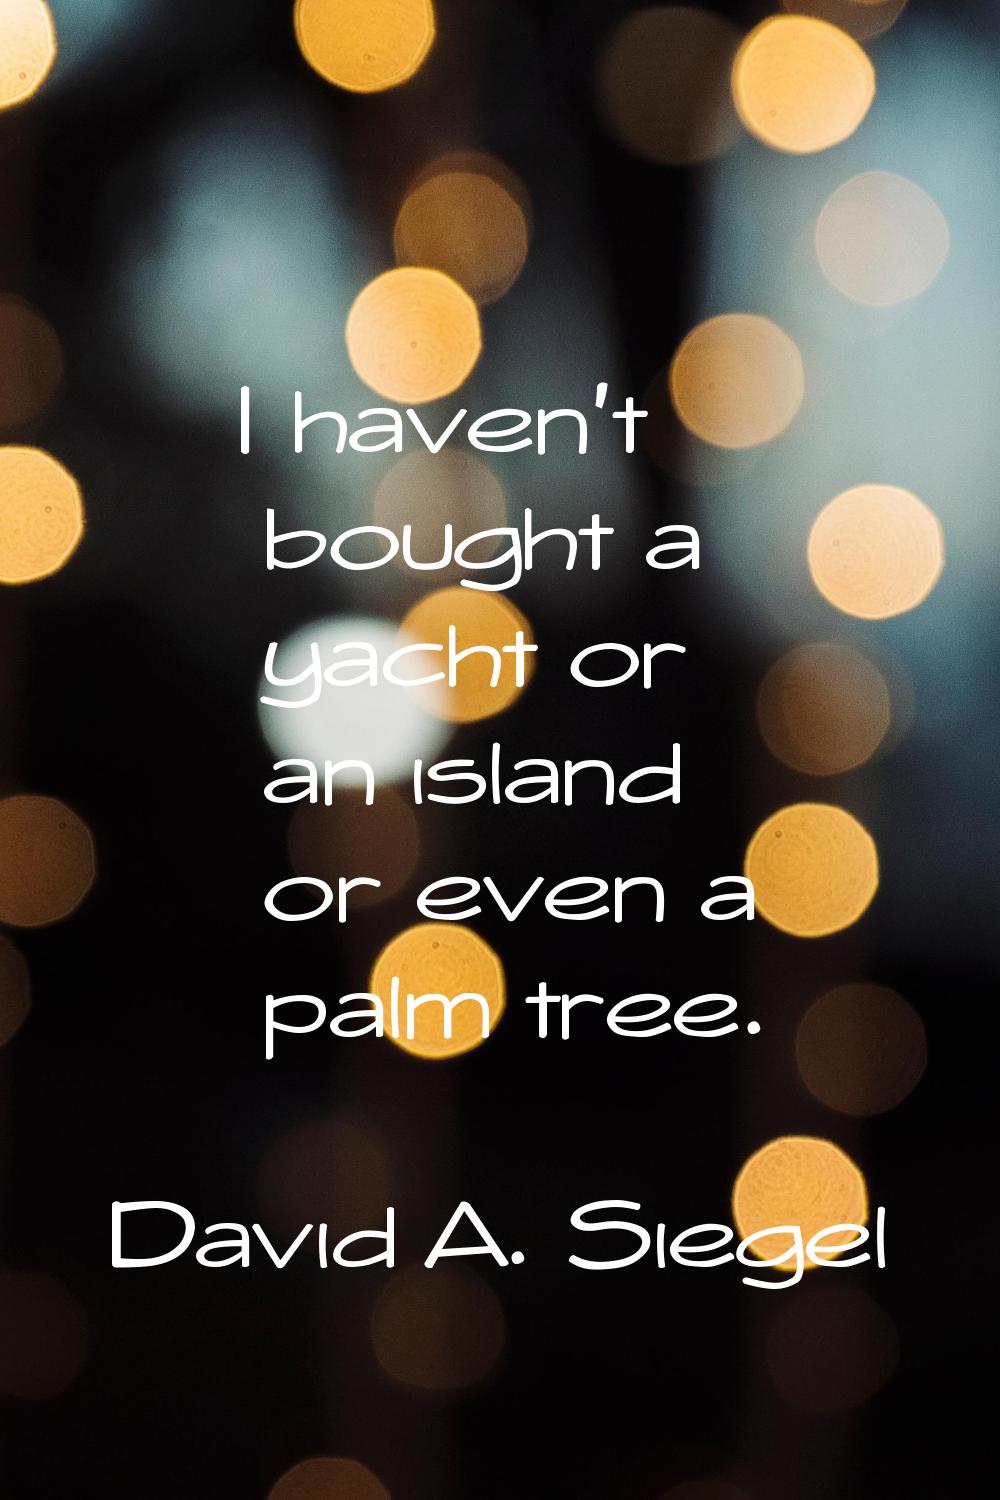 I haven't bought a yacht or an island or even a palm tree.